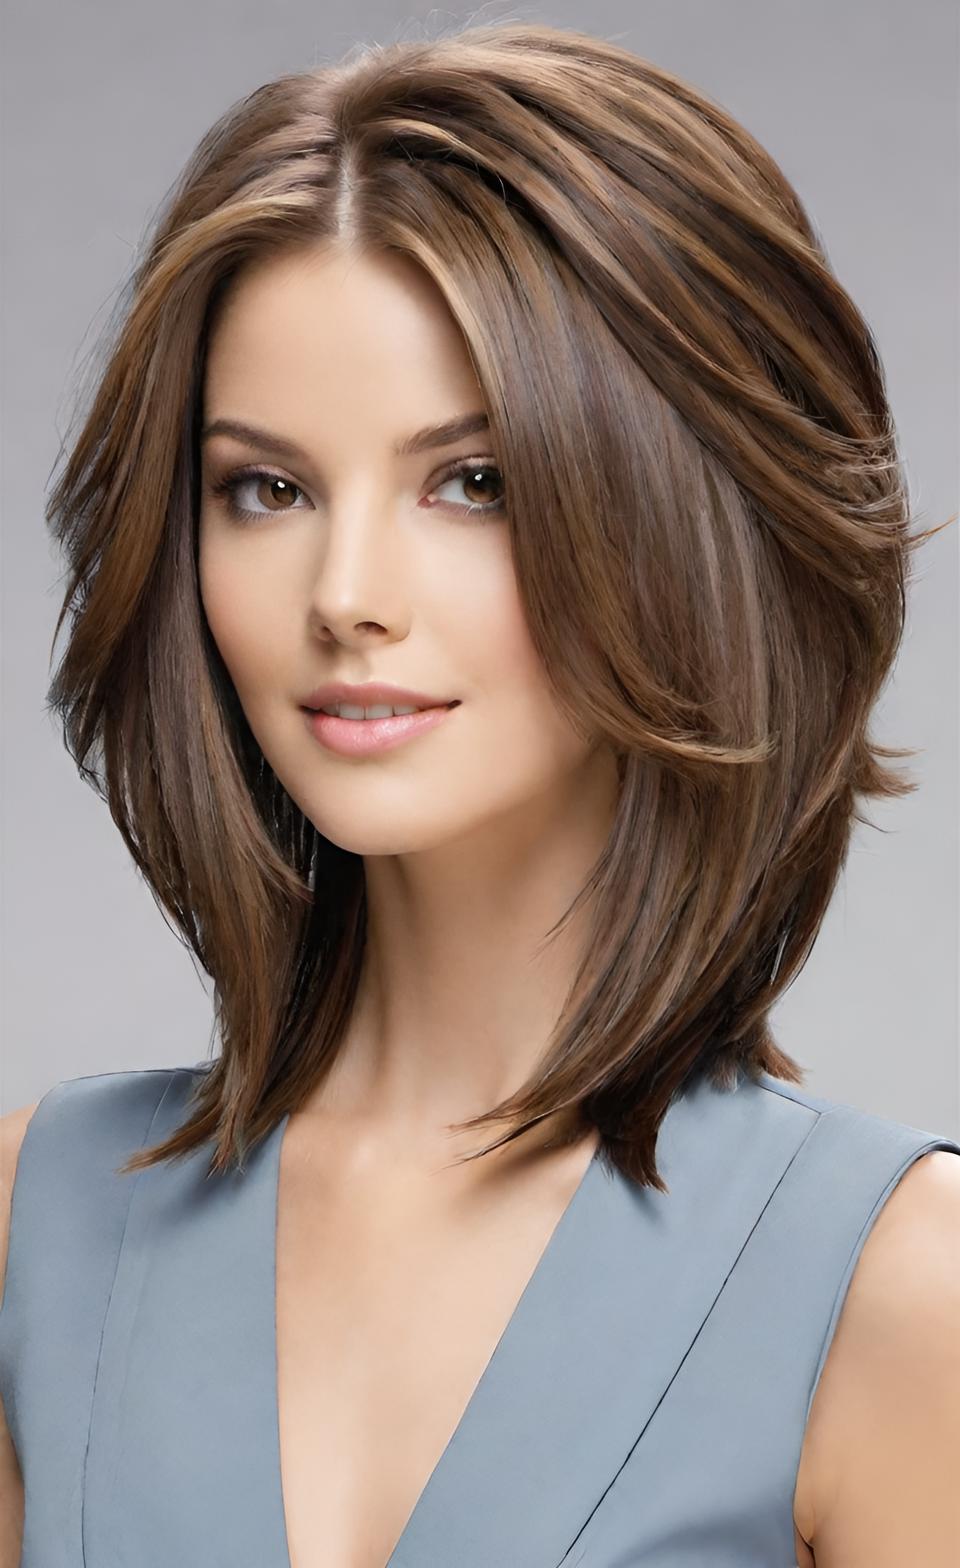 24 Beautiful Medium Length Hairstyles for Women to Wear in